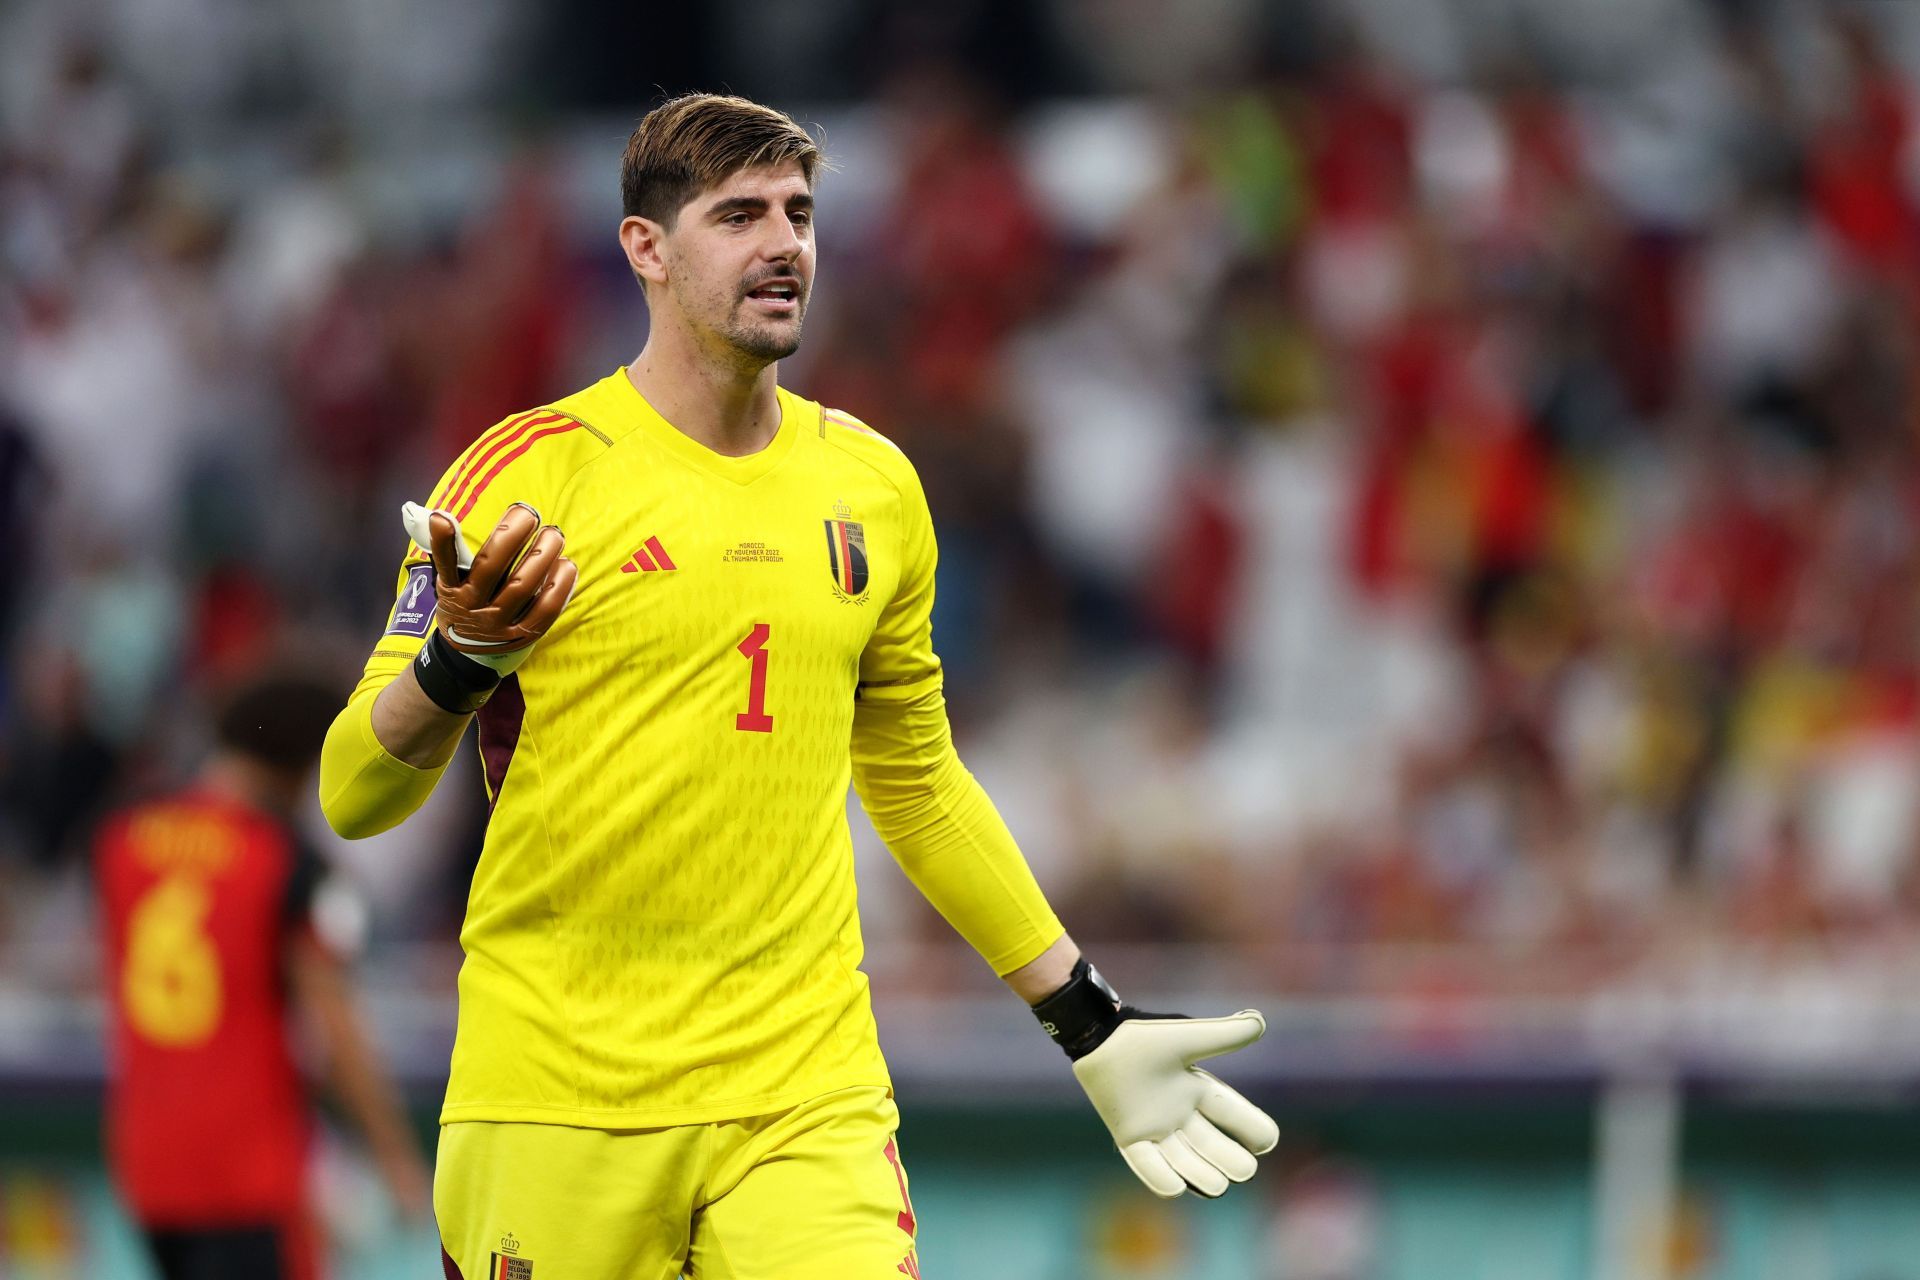 Thibaut Courtois made a string of fine saves to keep Belgium in the game but to no avail.